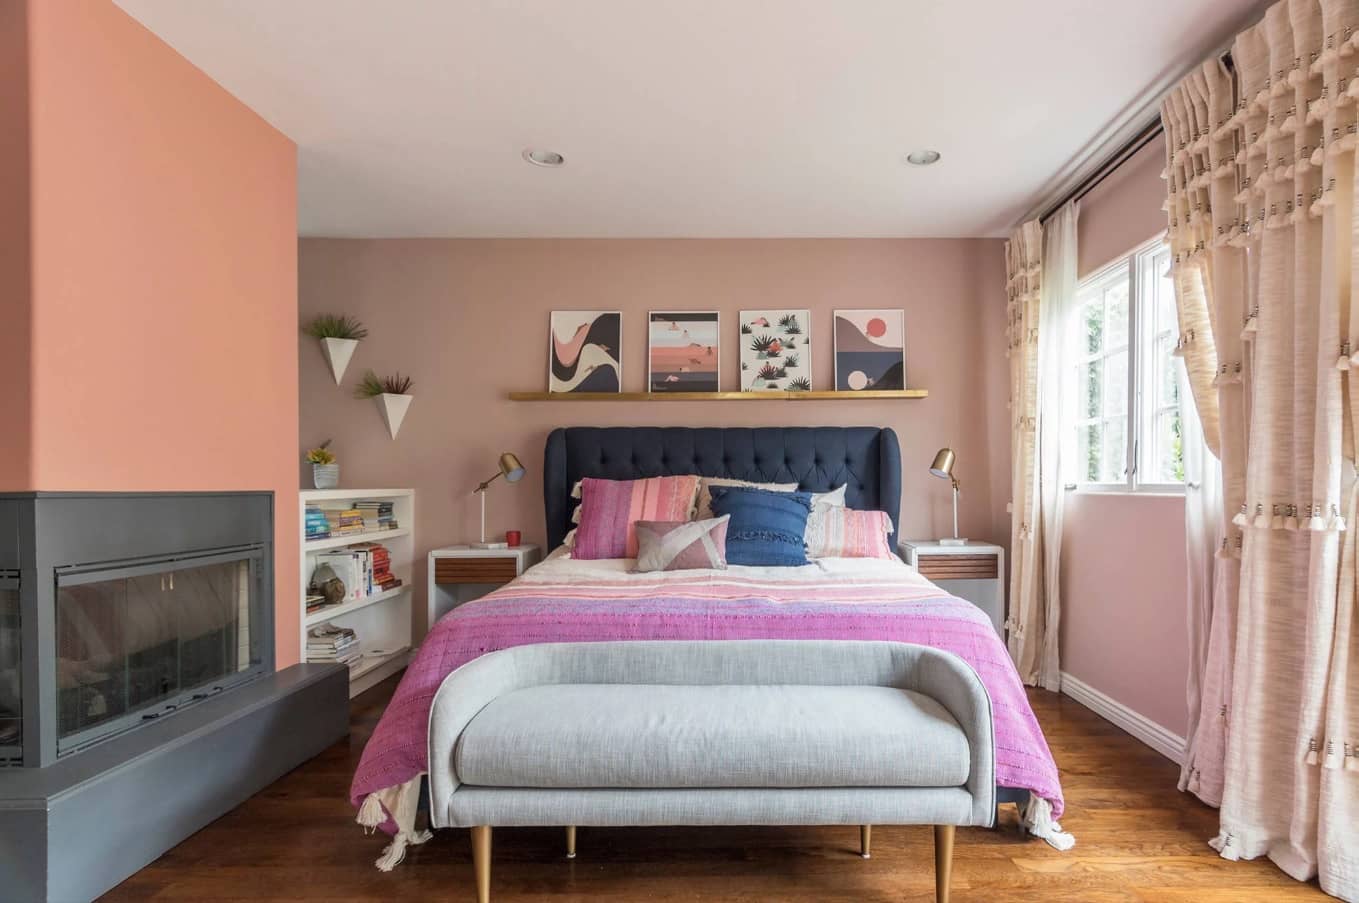 What to Know Before Remodeling Your Master Bedroom. Colorful budget room with peach colored walls in casual style